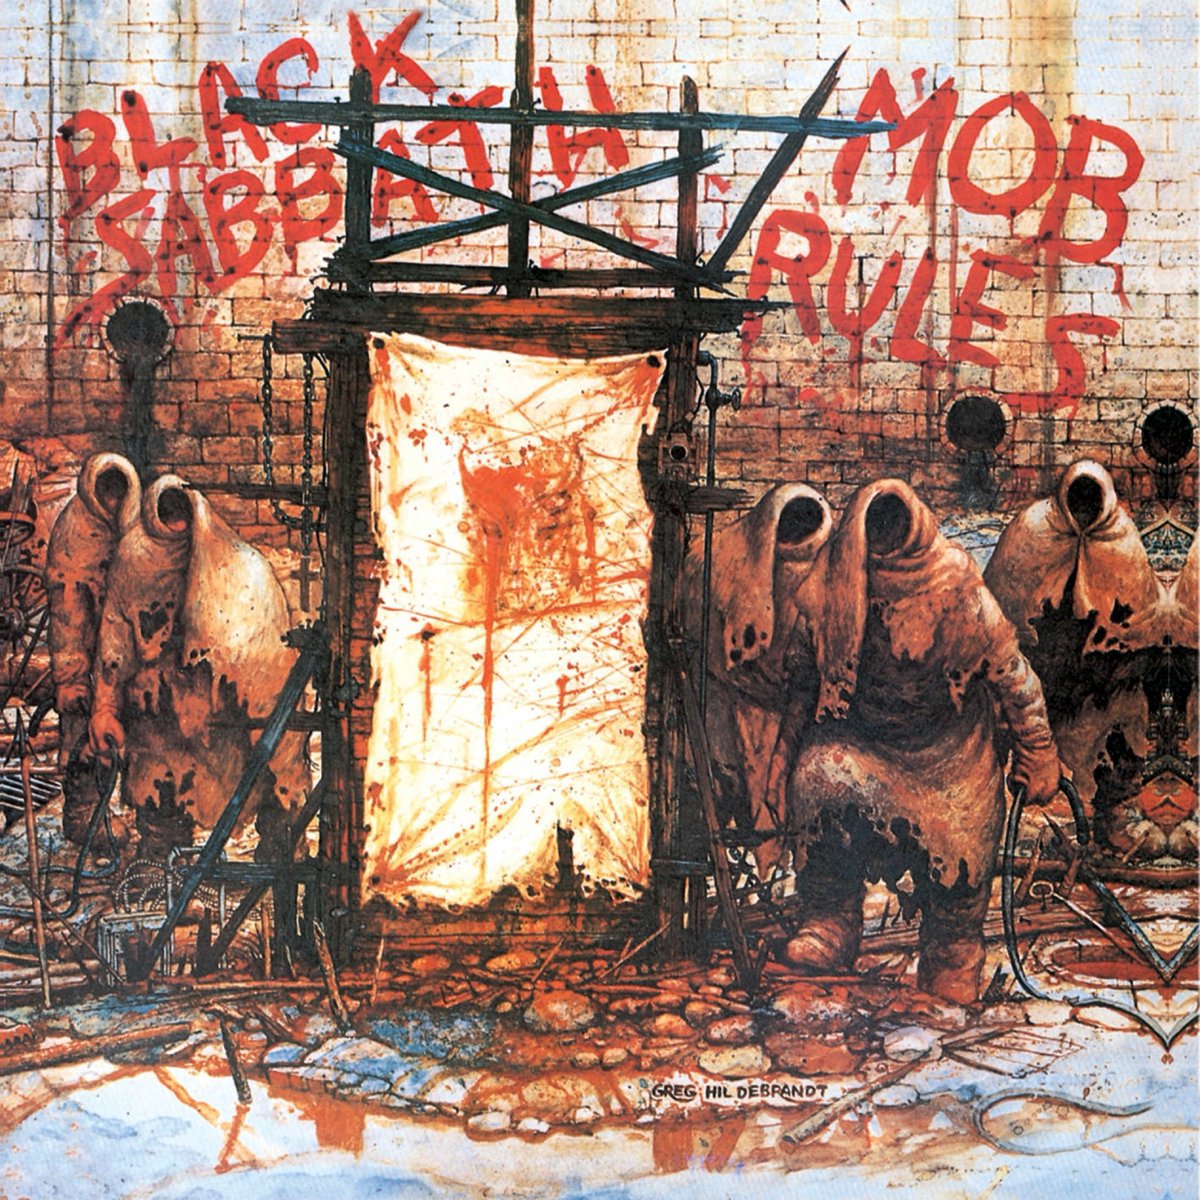 Nov 4th 1981 #BlackSabbath released the album 'Mob Rules' #OverAndOver #TheMobRules #TurnUpTheNight #SlippingAway #HeavyMetal

Did you know..
It was the band’s first album with drummer Vinny Appice.
The album peaked at number 12 on the #OfficialCharts